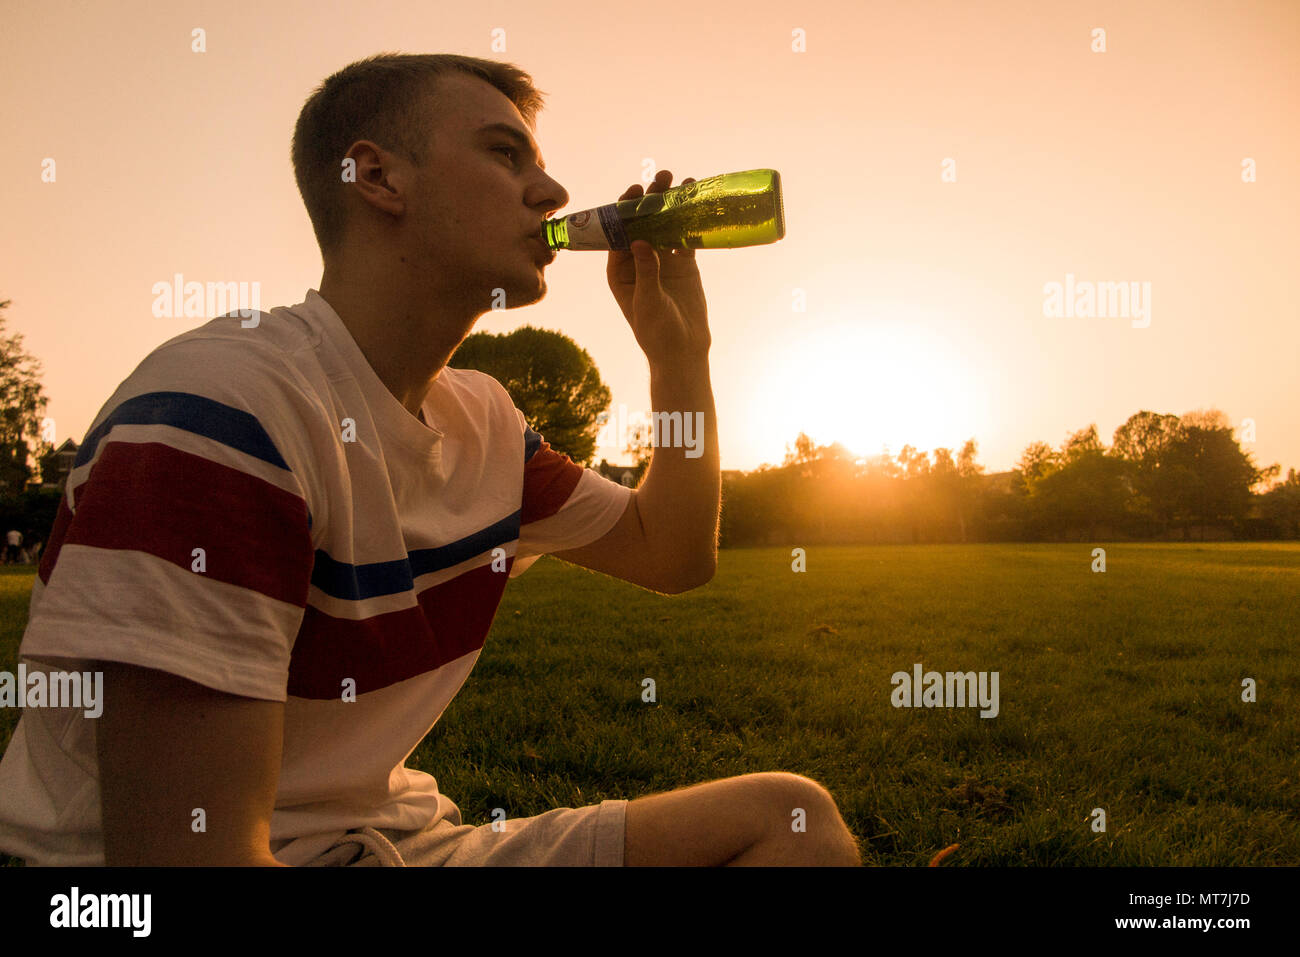 A teenager drinks from a beer bottle as the sun sets in an urban setting Stock Photo